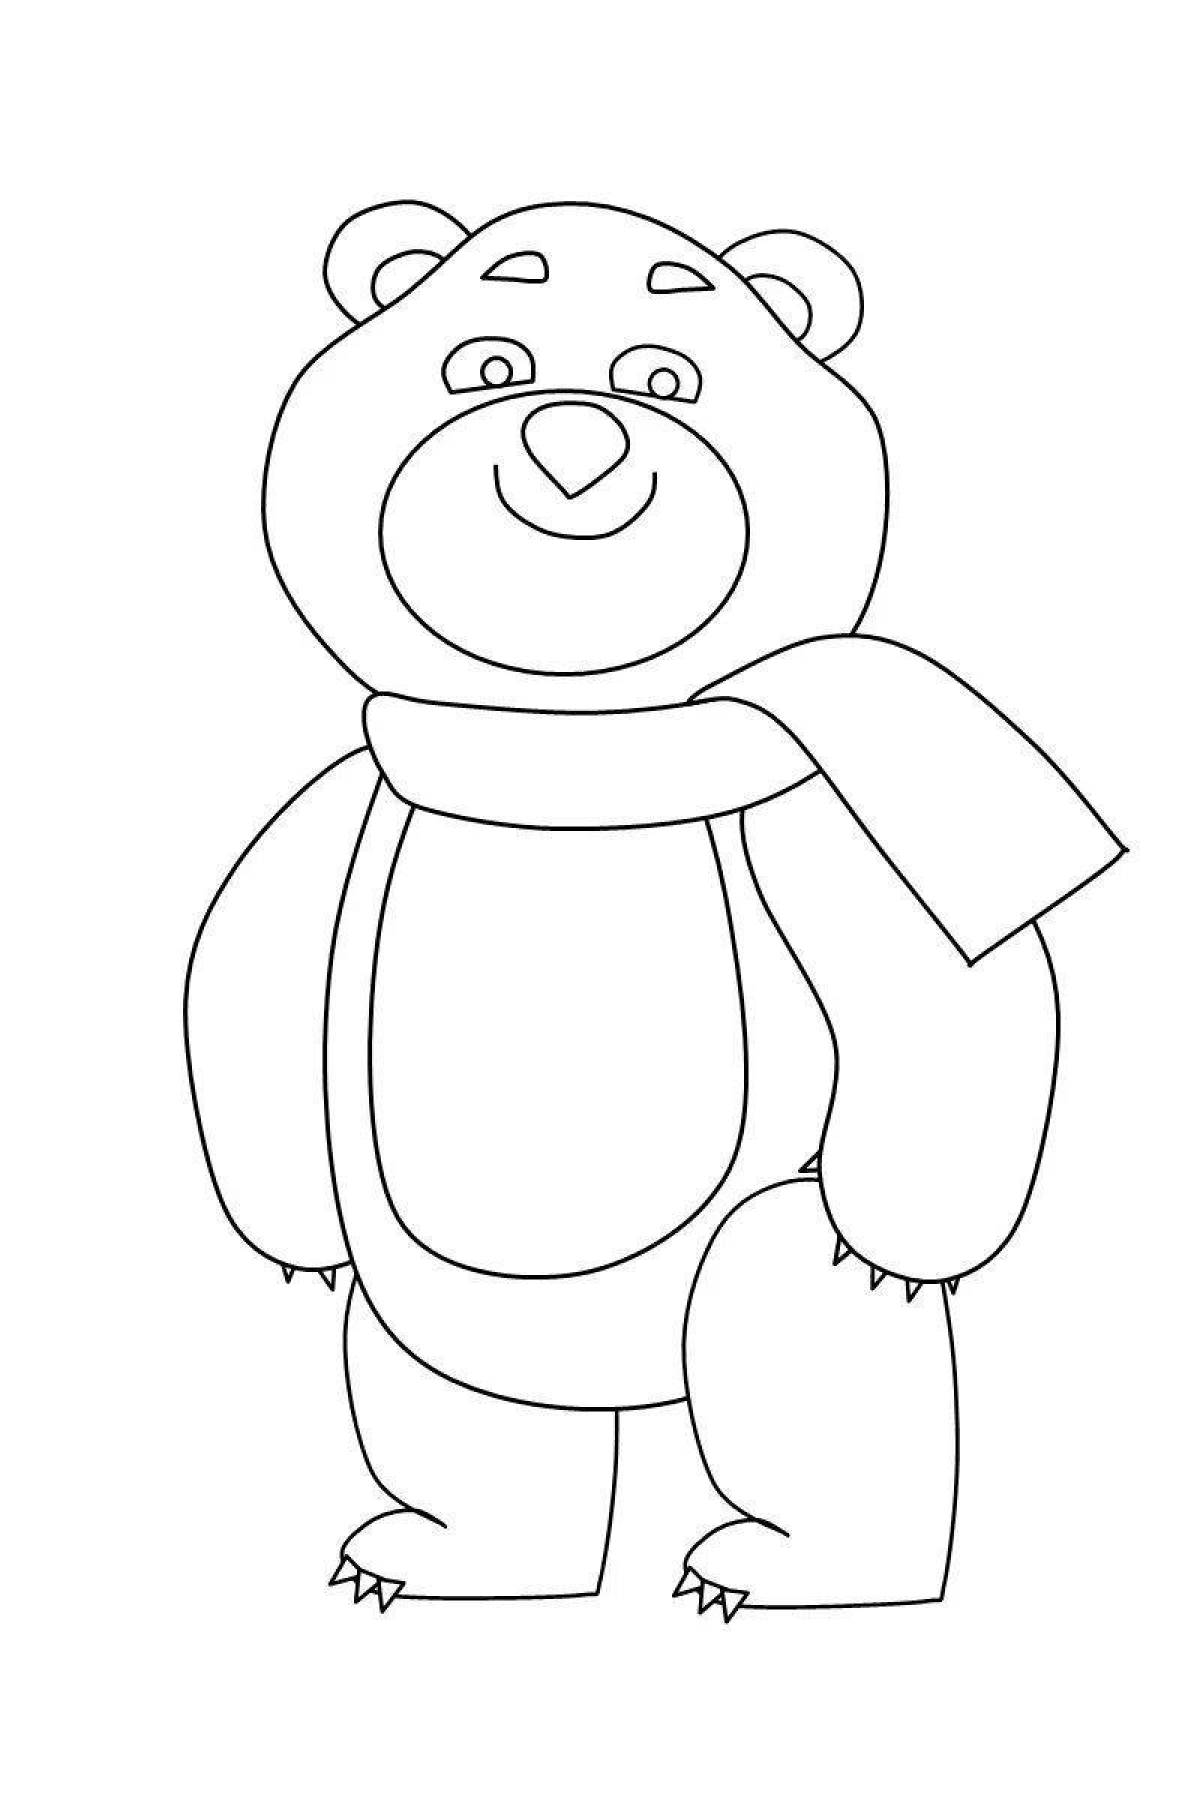 Coloring page shining olympic bear